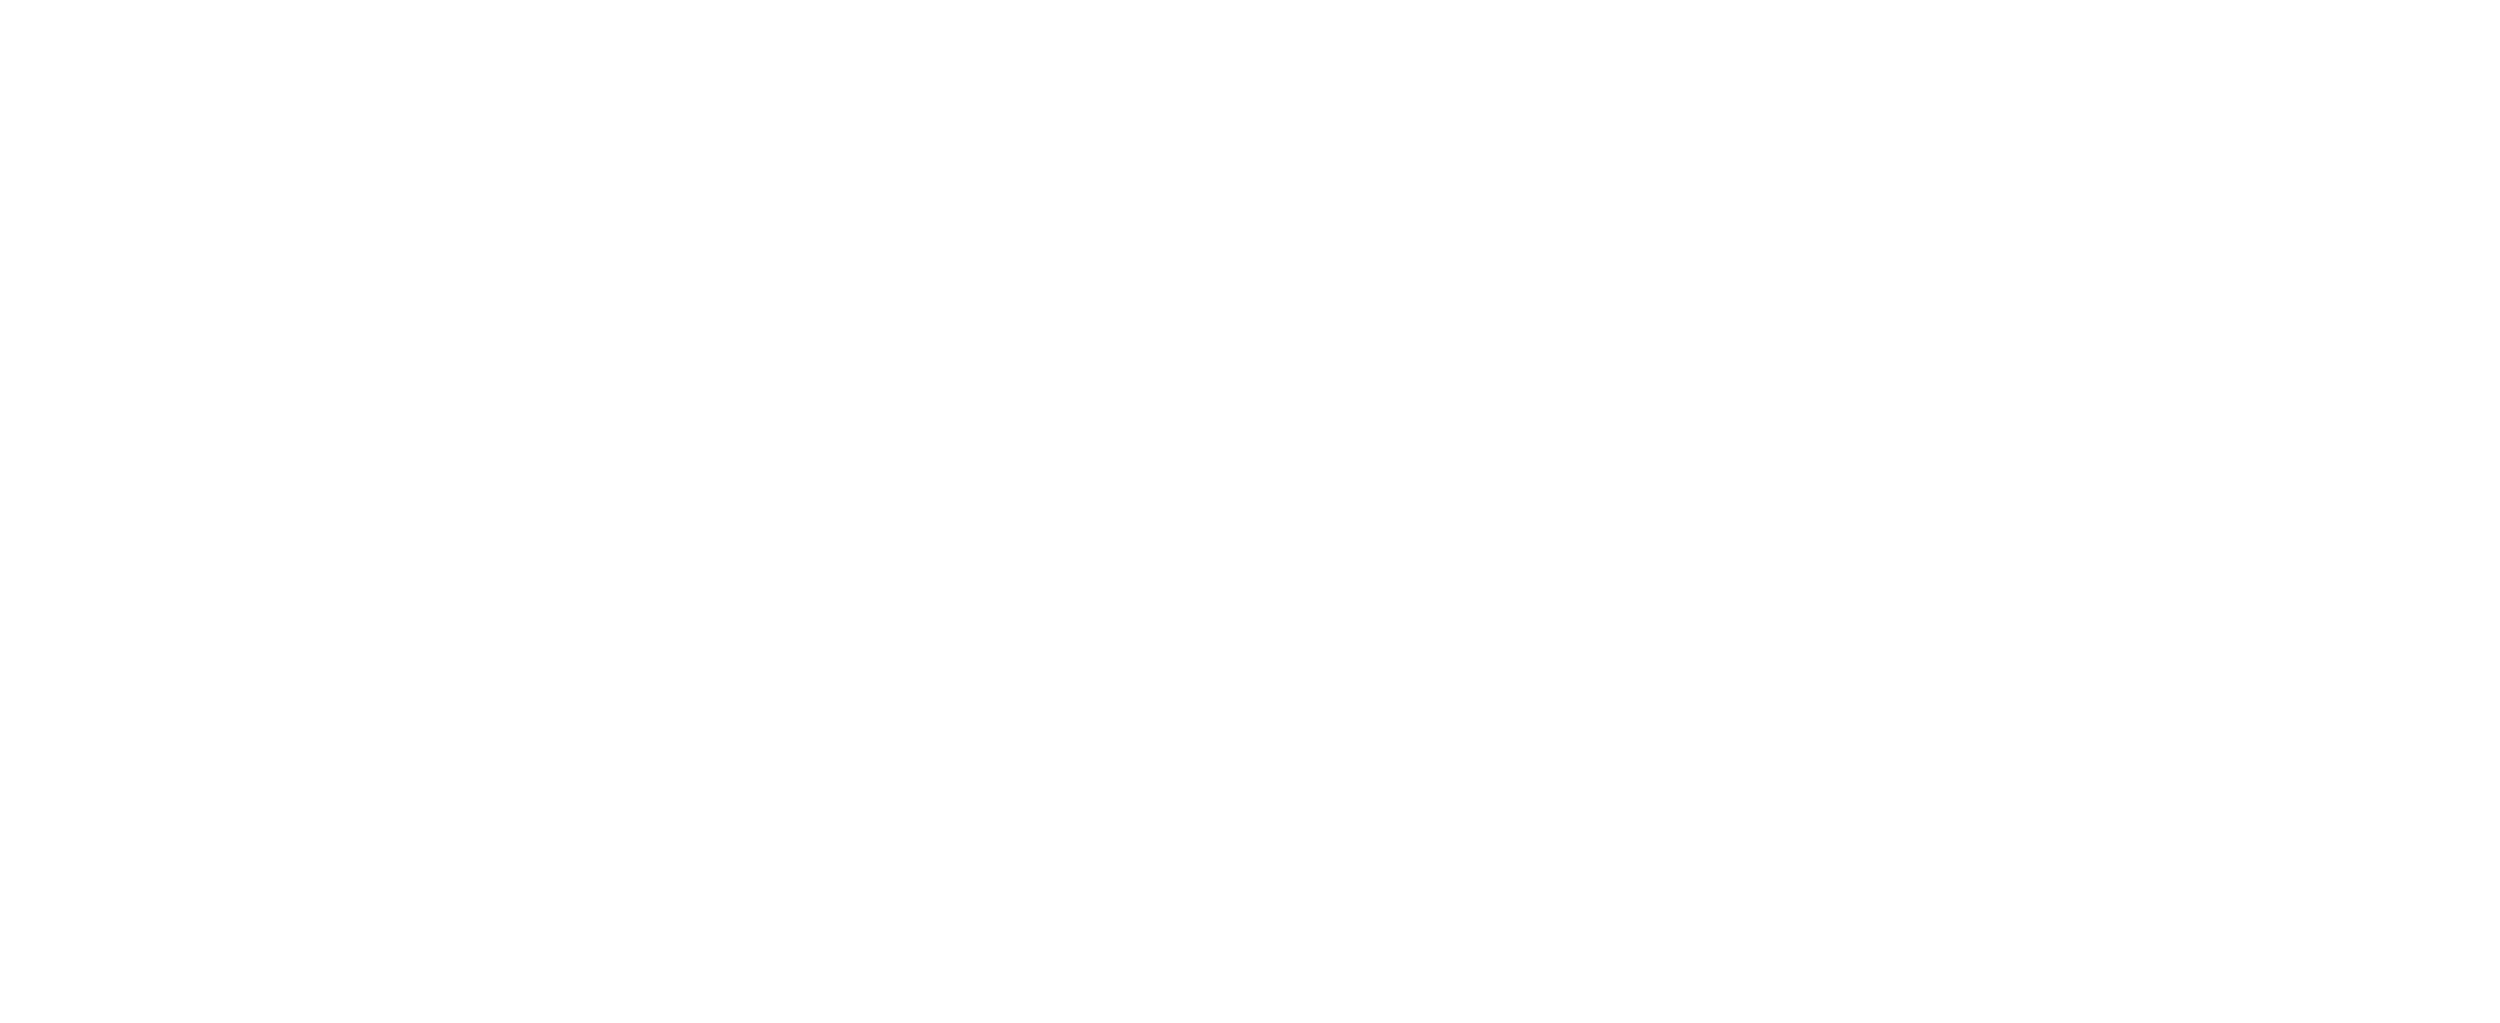 Strong Tower Church